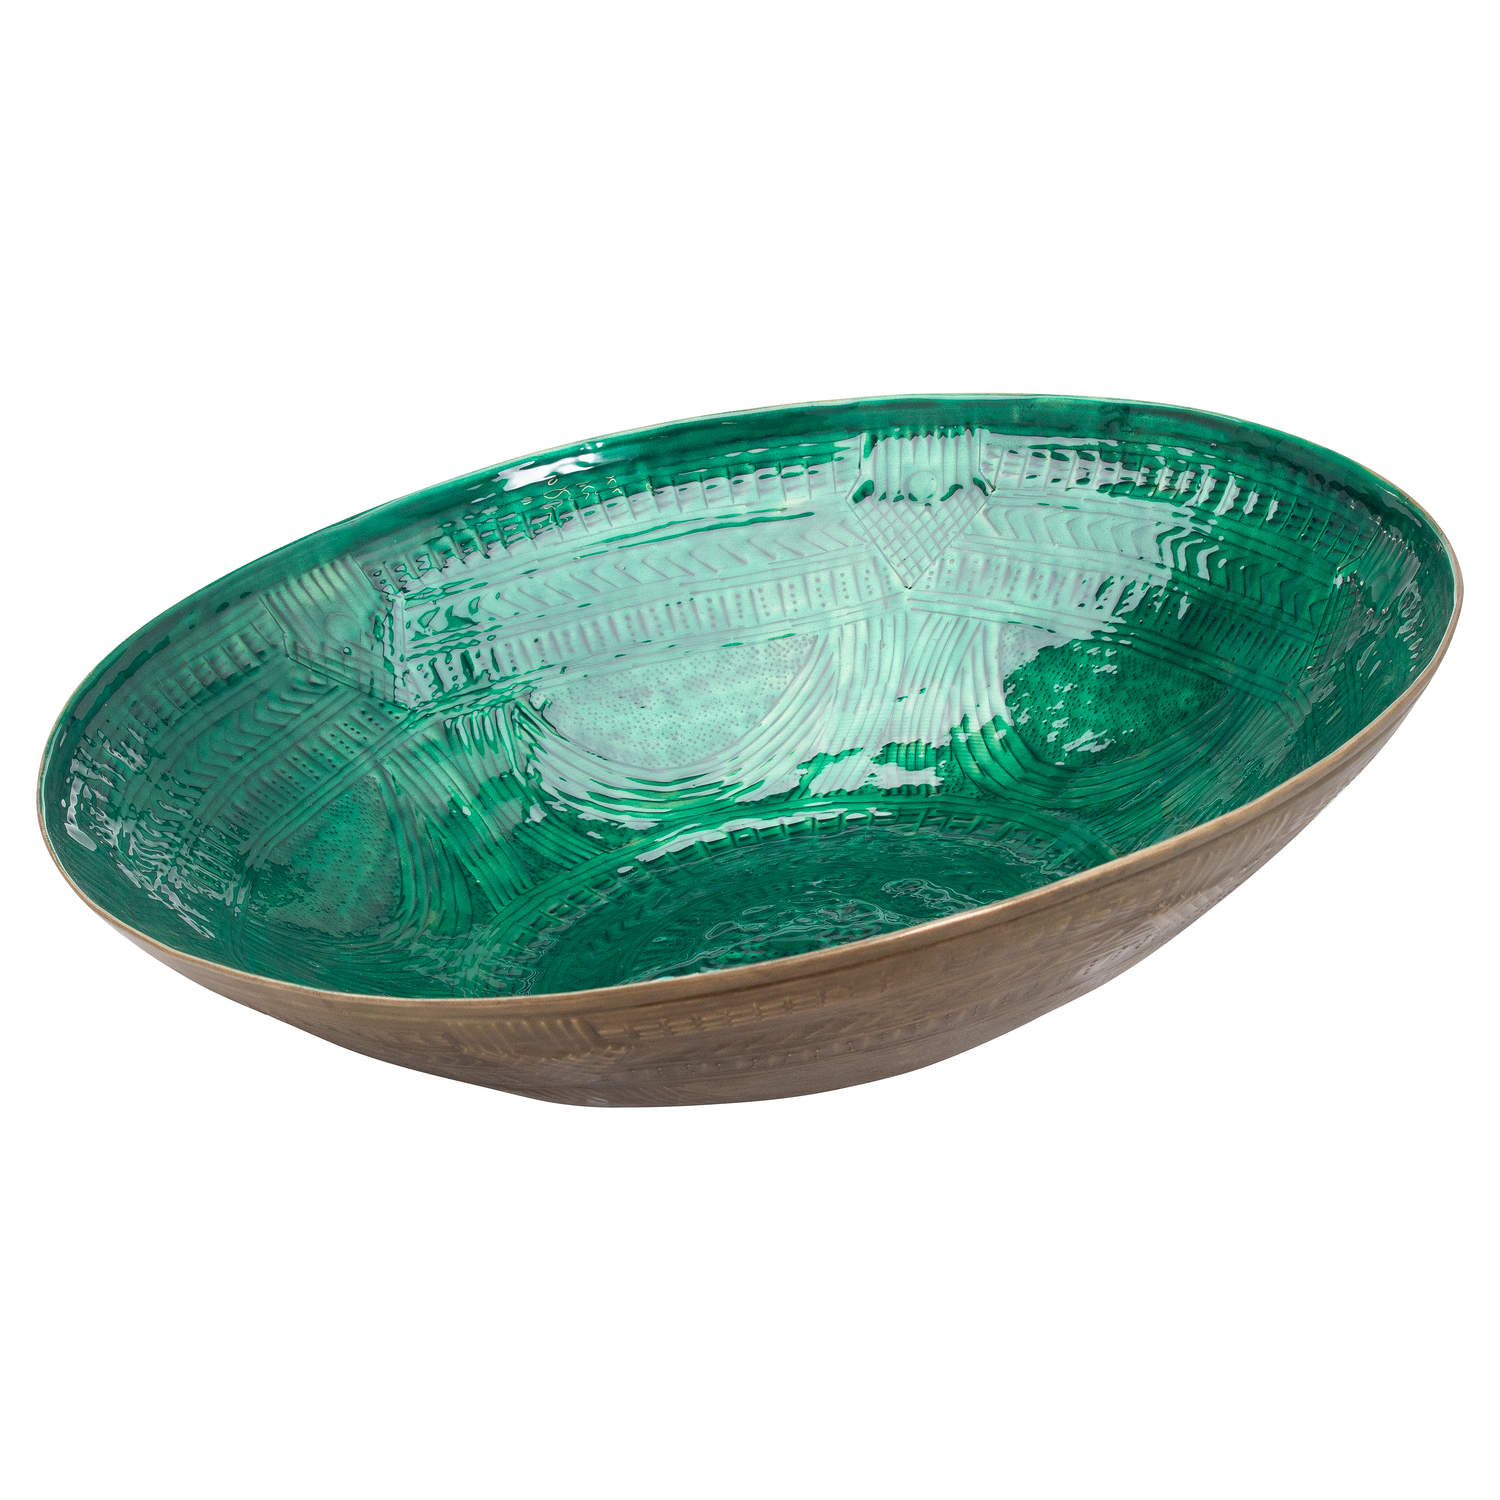 aztec-collection-brass-embossed-ceramic-dipped-bowl_21088-a fabric from JLP